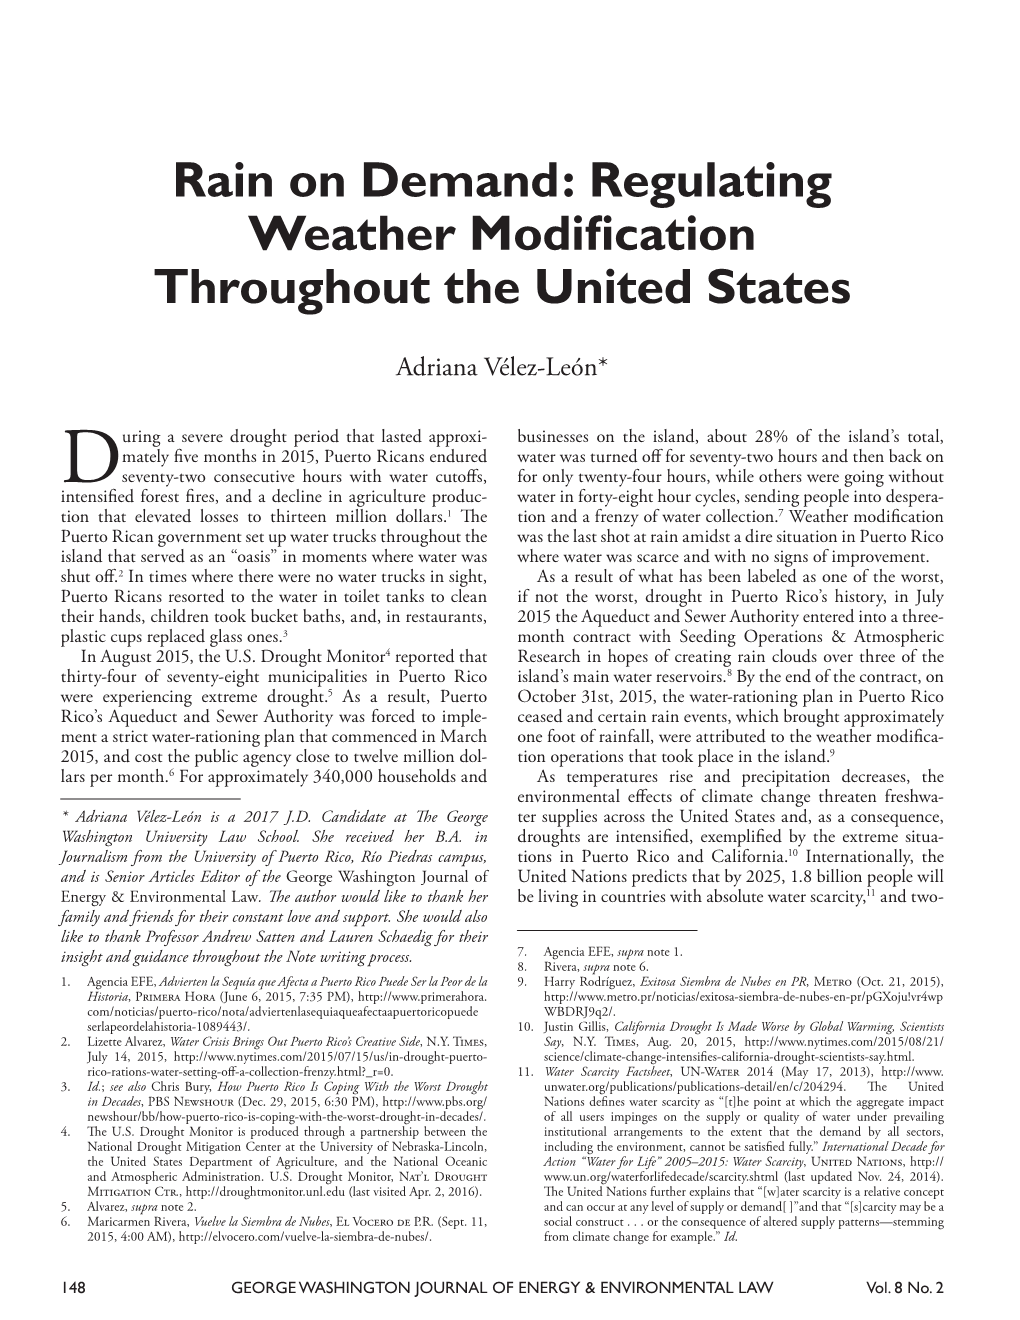 Rain on Demand: Regulating Weather Modiﬁcation Throughout the United States